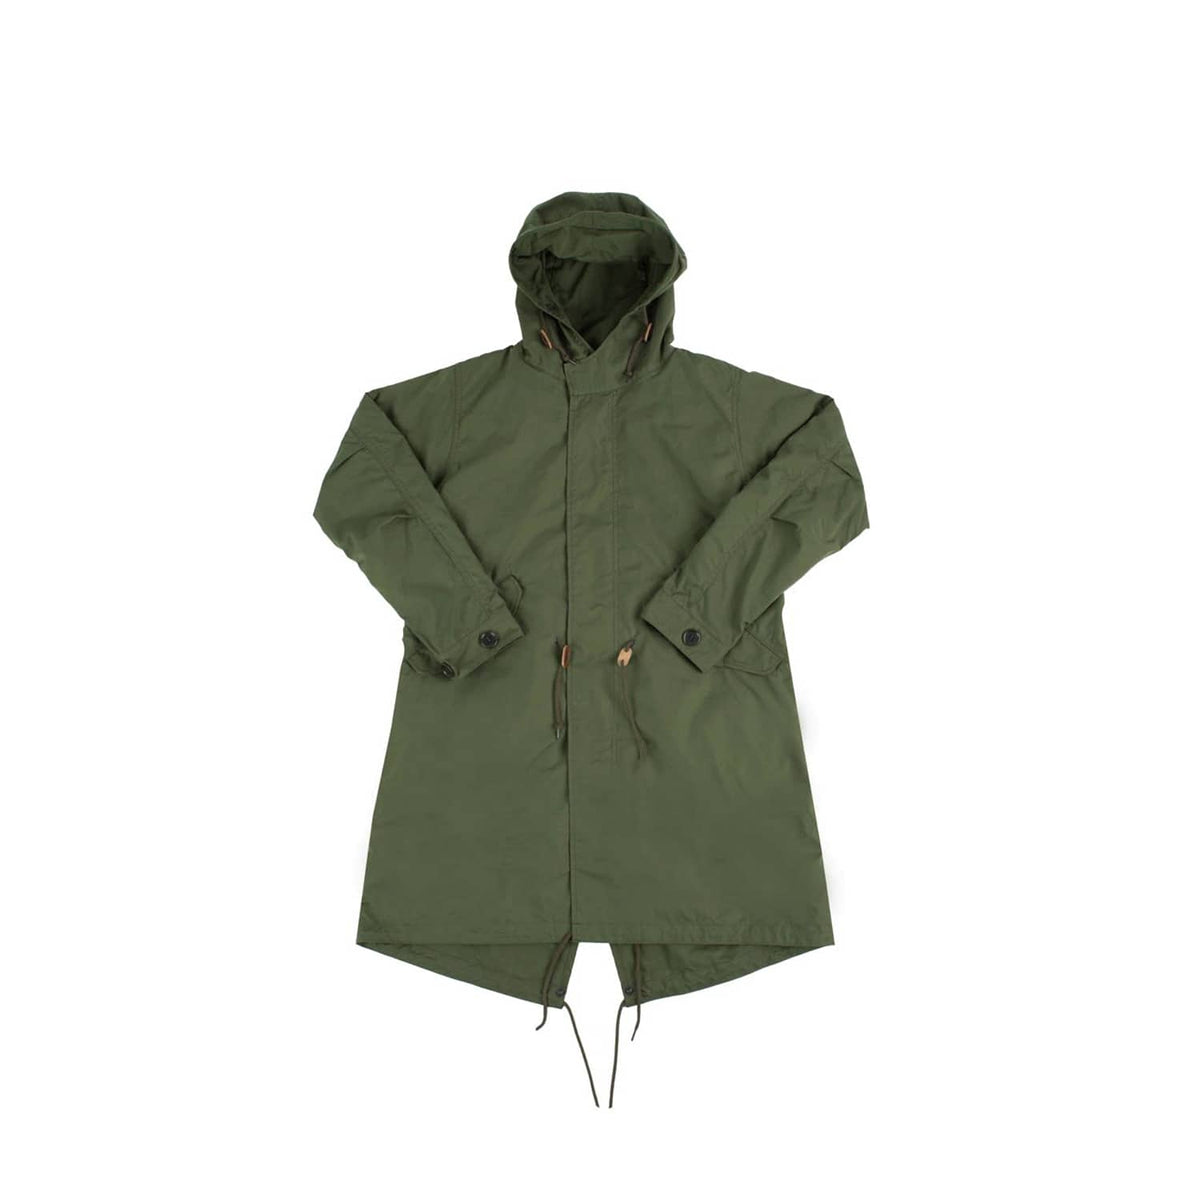 Iron Heart IHM-38-OLV 5oz Quilted Lining M-51 Type Field Coat Olive FINAL SALE